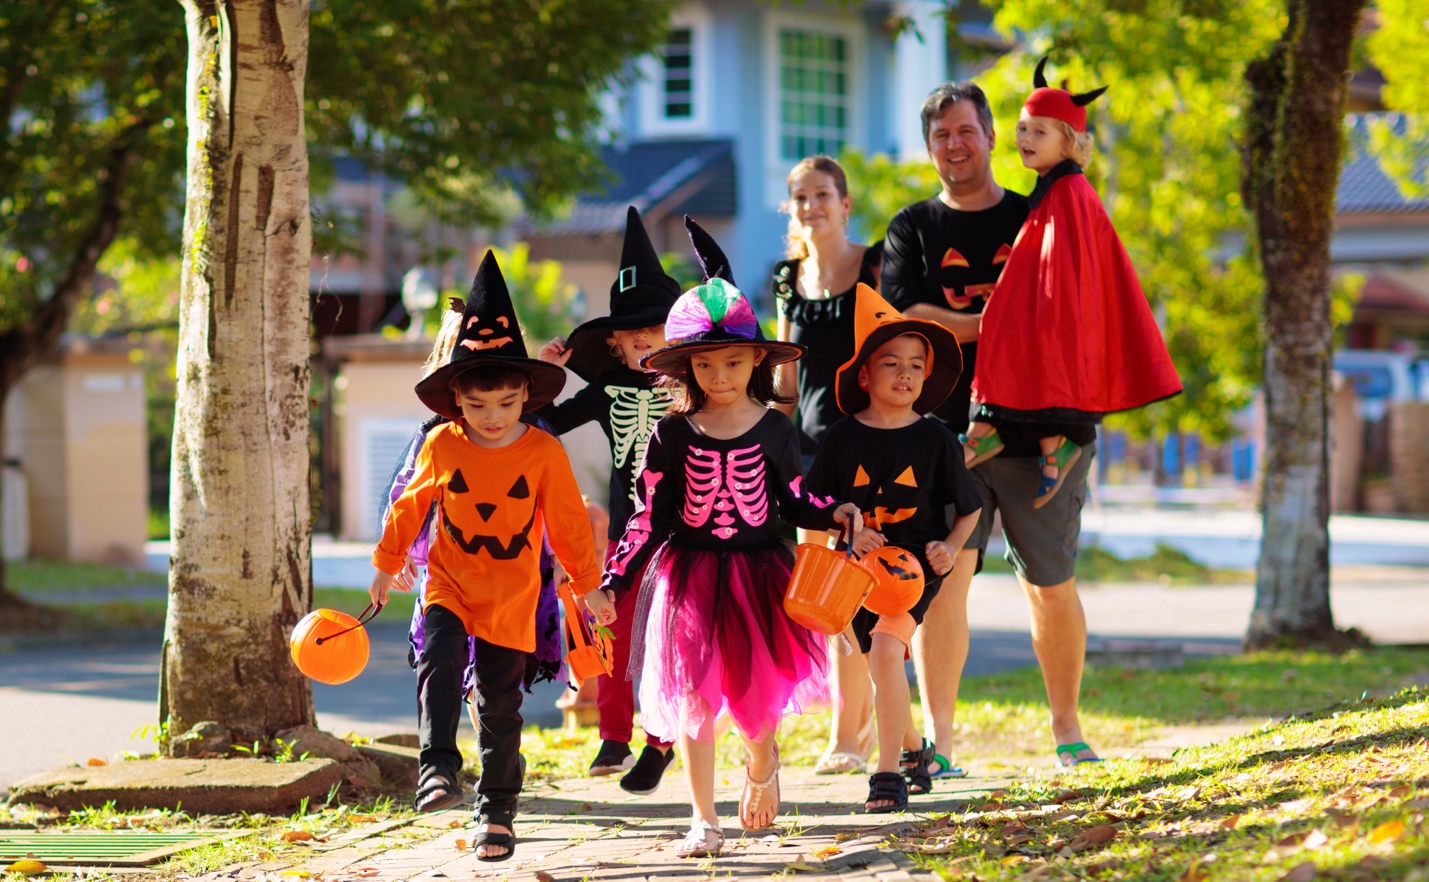 Kids trick-or-treating with adults